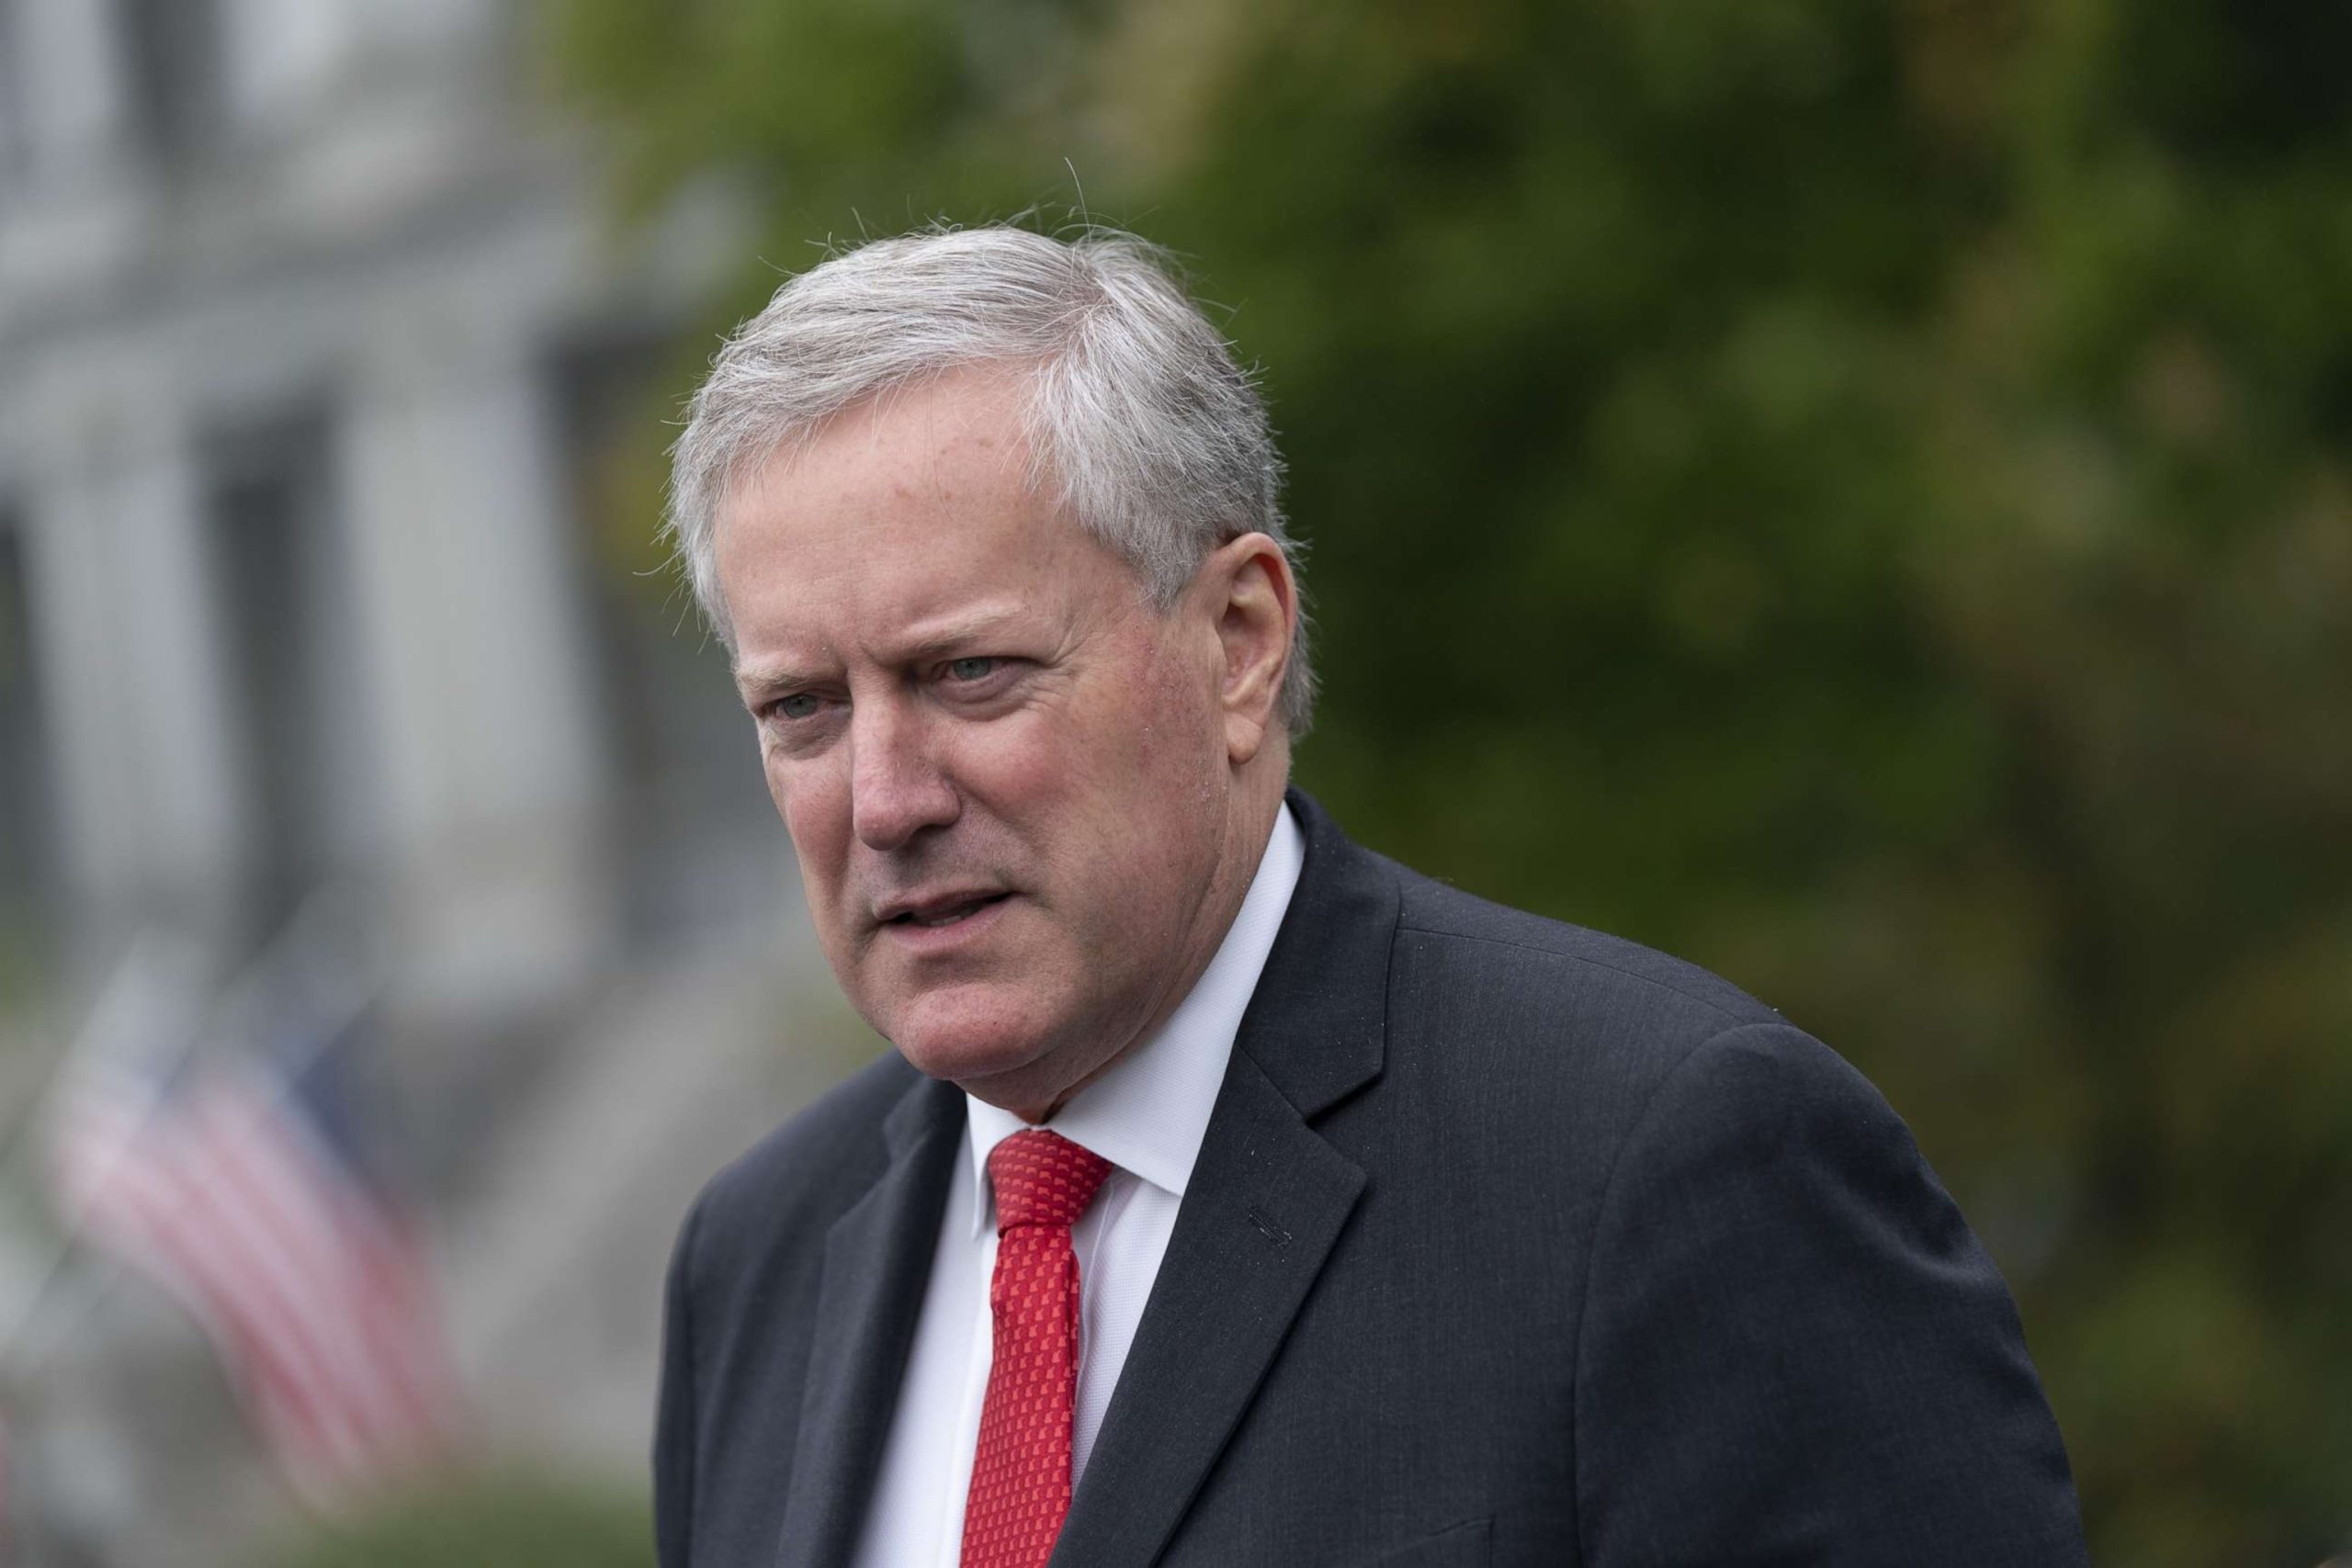 Sources reveal that Mark Meadows, former Chief of Staff, has been granted immunity and has informed the special counsel about his warnings to Trump regarding 2020 claims.